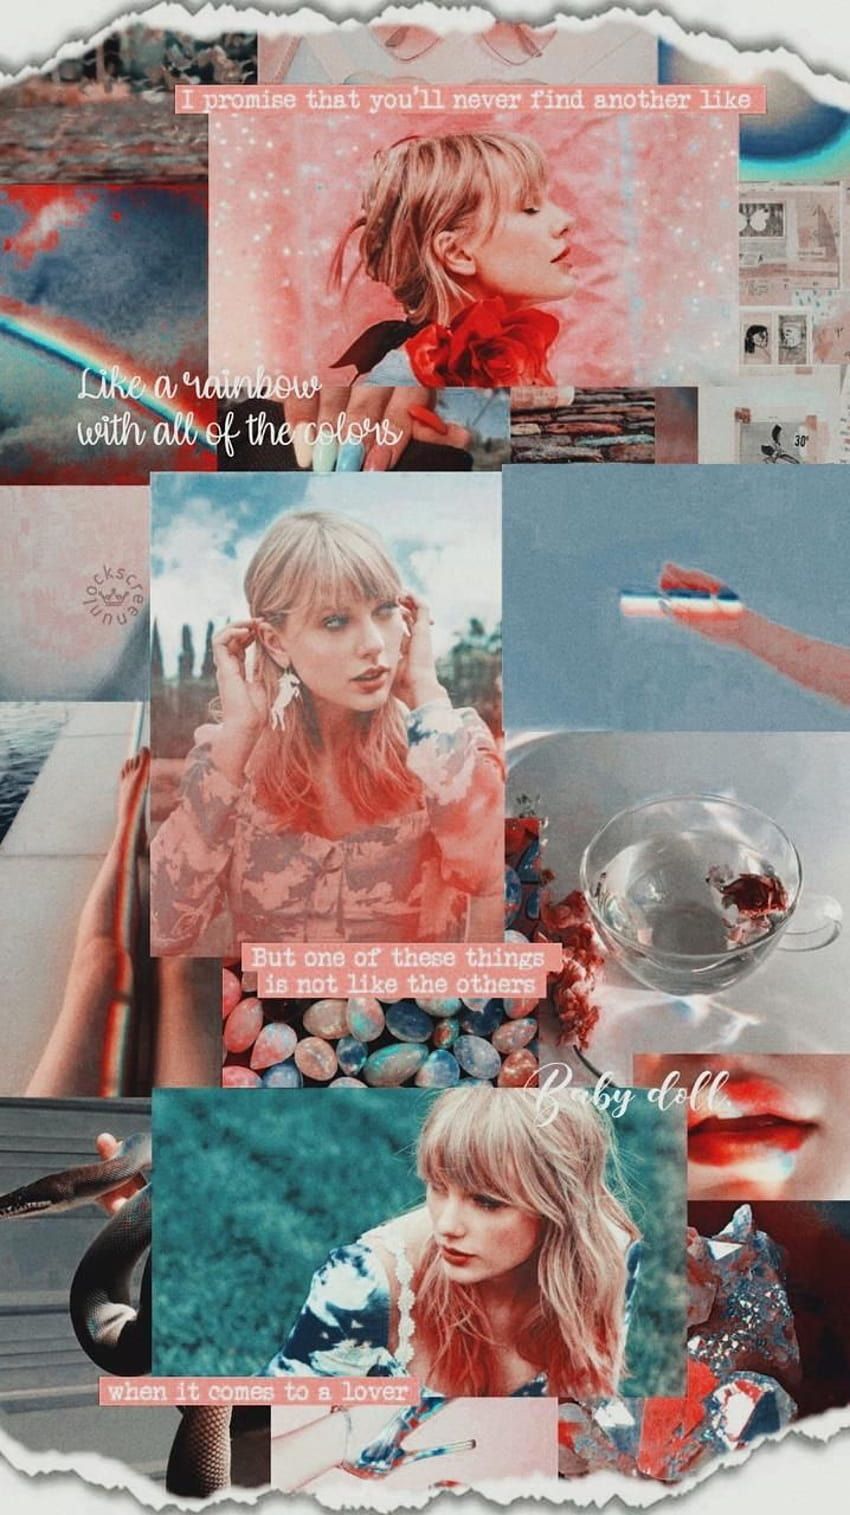 Aesthetic Taylor Swift wallpaper I made for my phone! - Taylor Swift